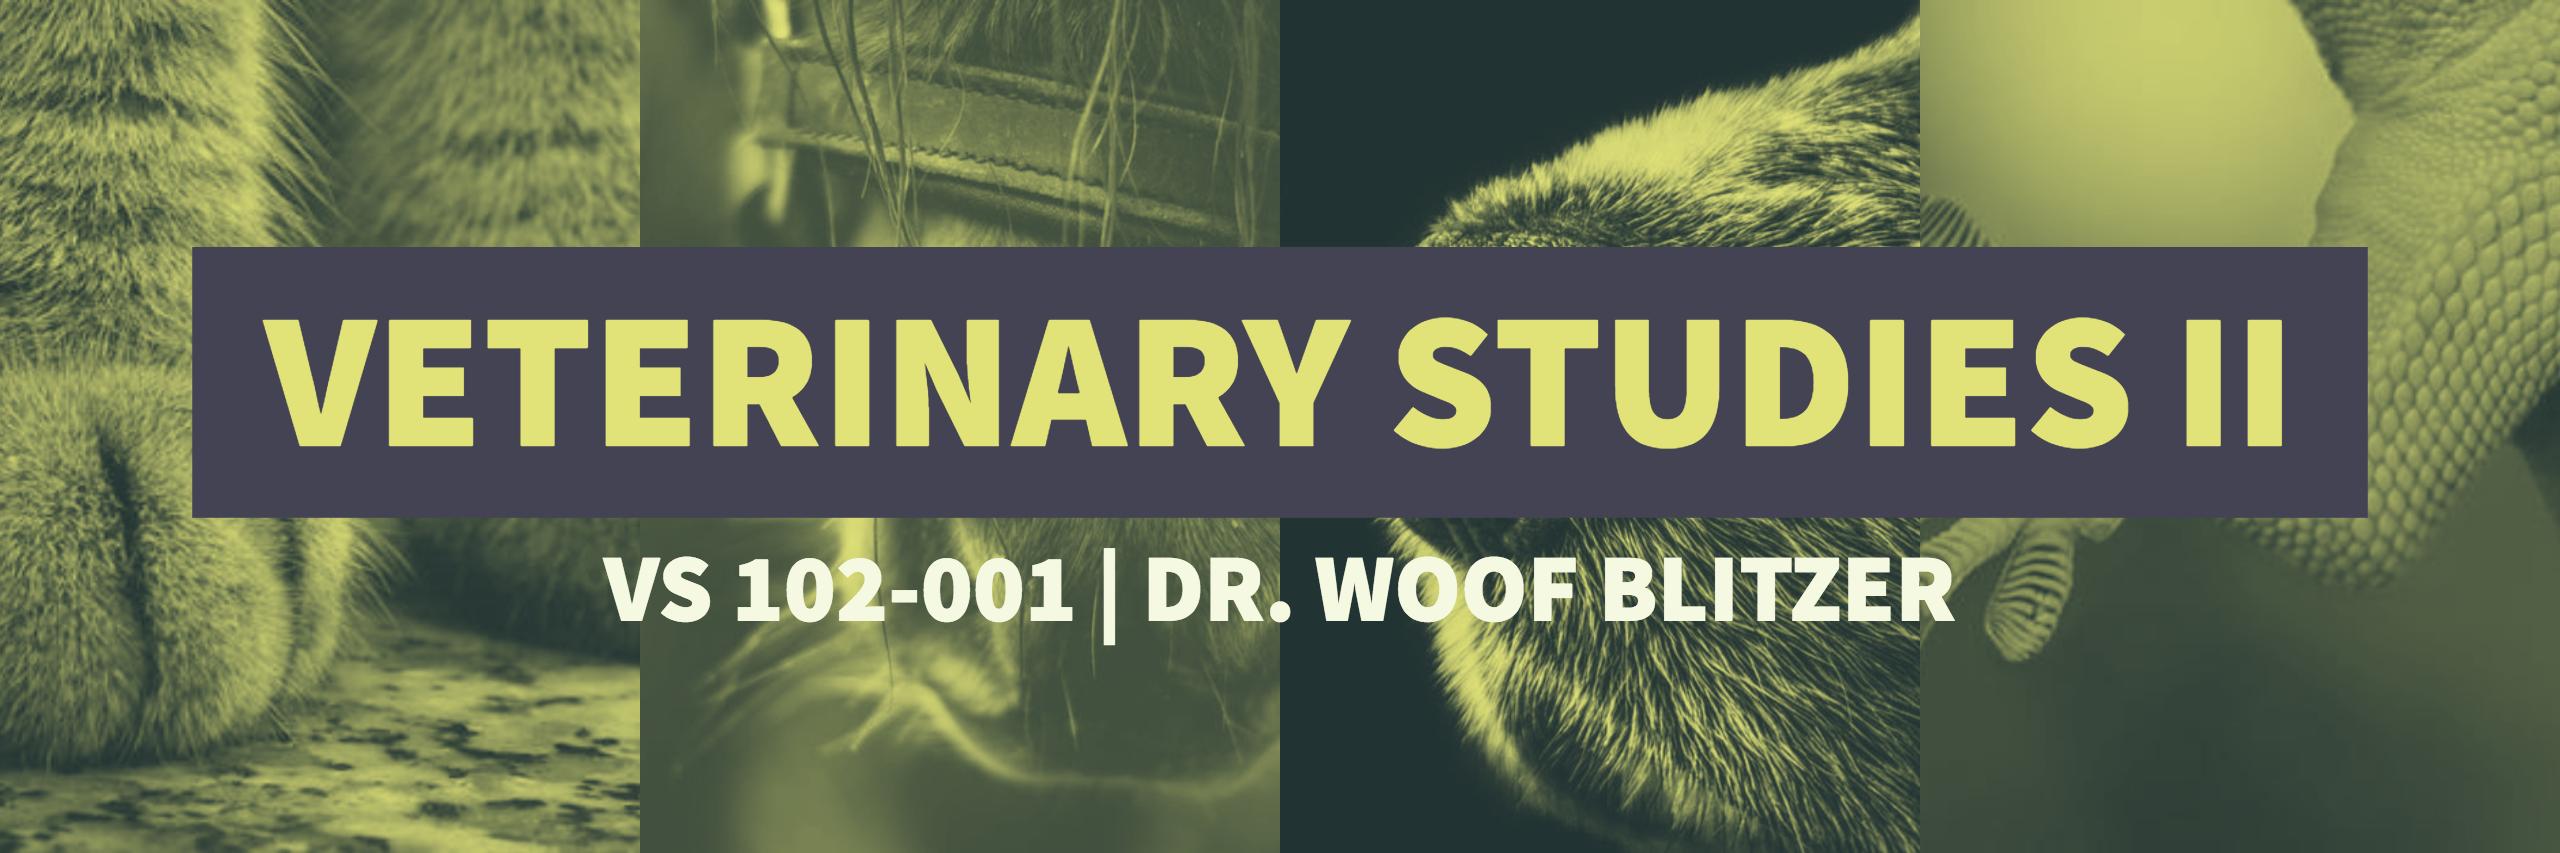 course banner for veterinary studies course featuring animal paws and snouts